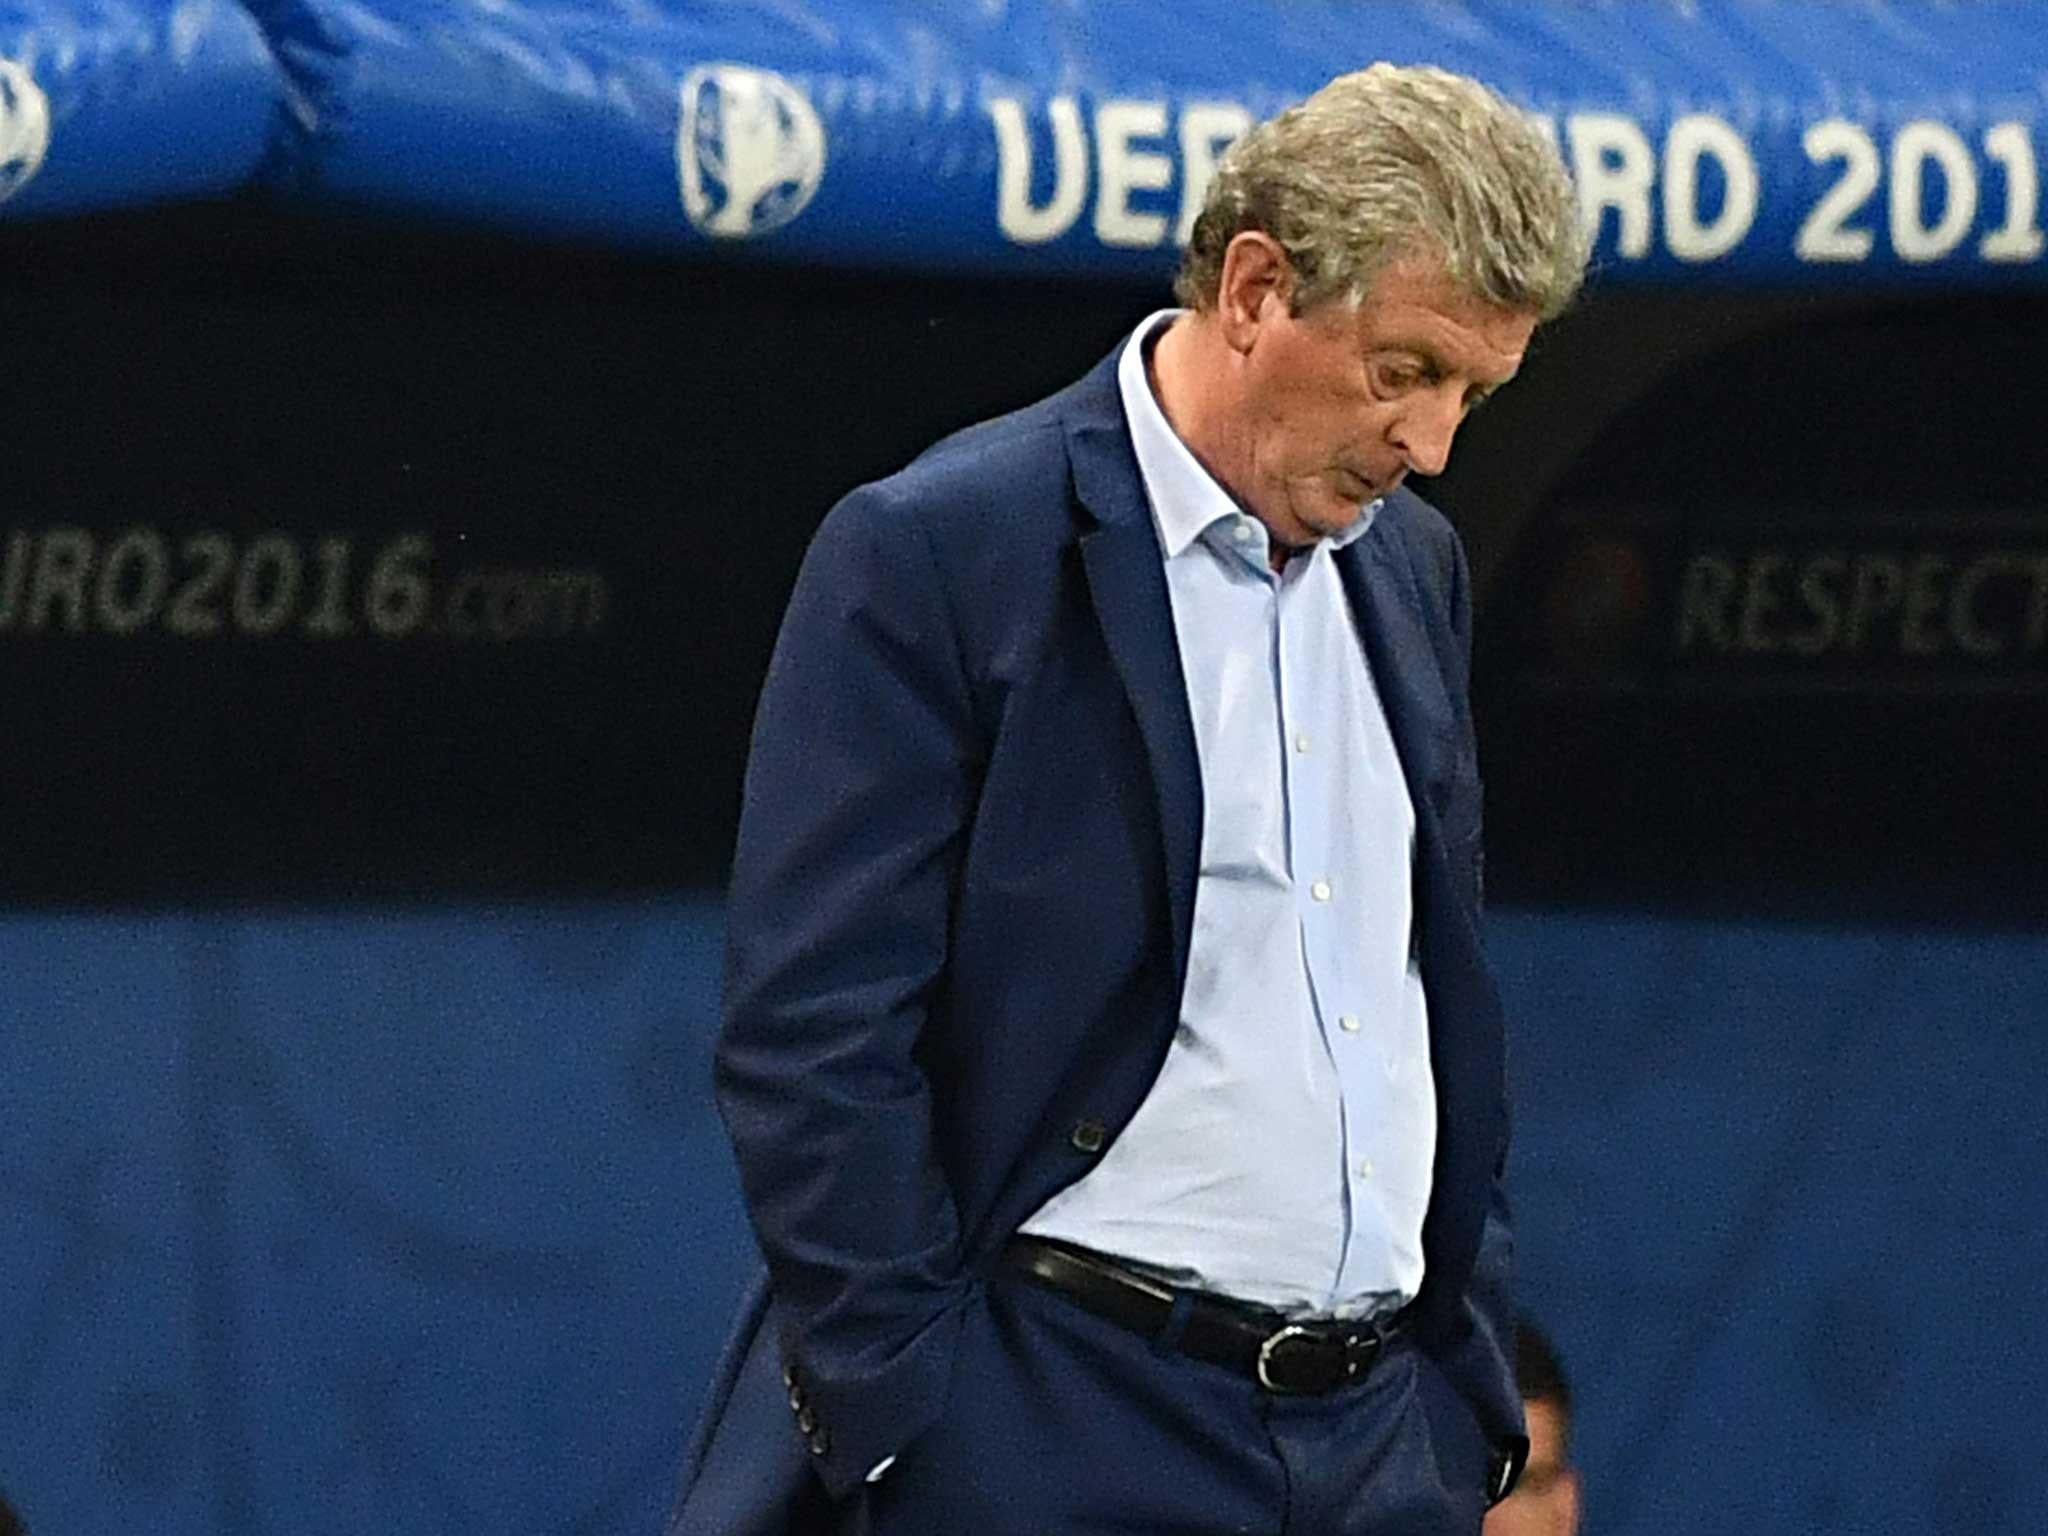 Roy Hodgson announced his departure straight after the match